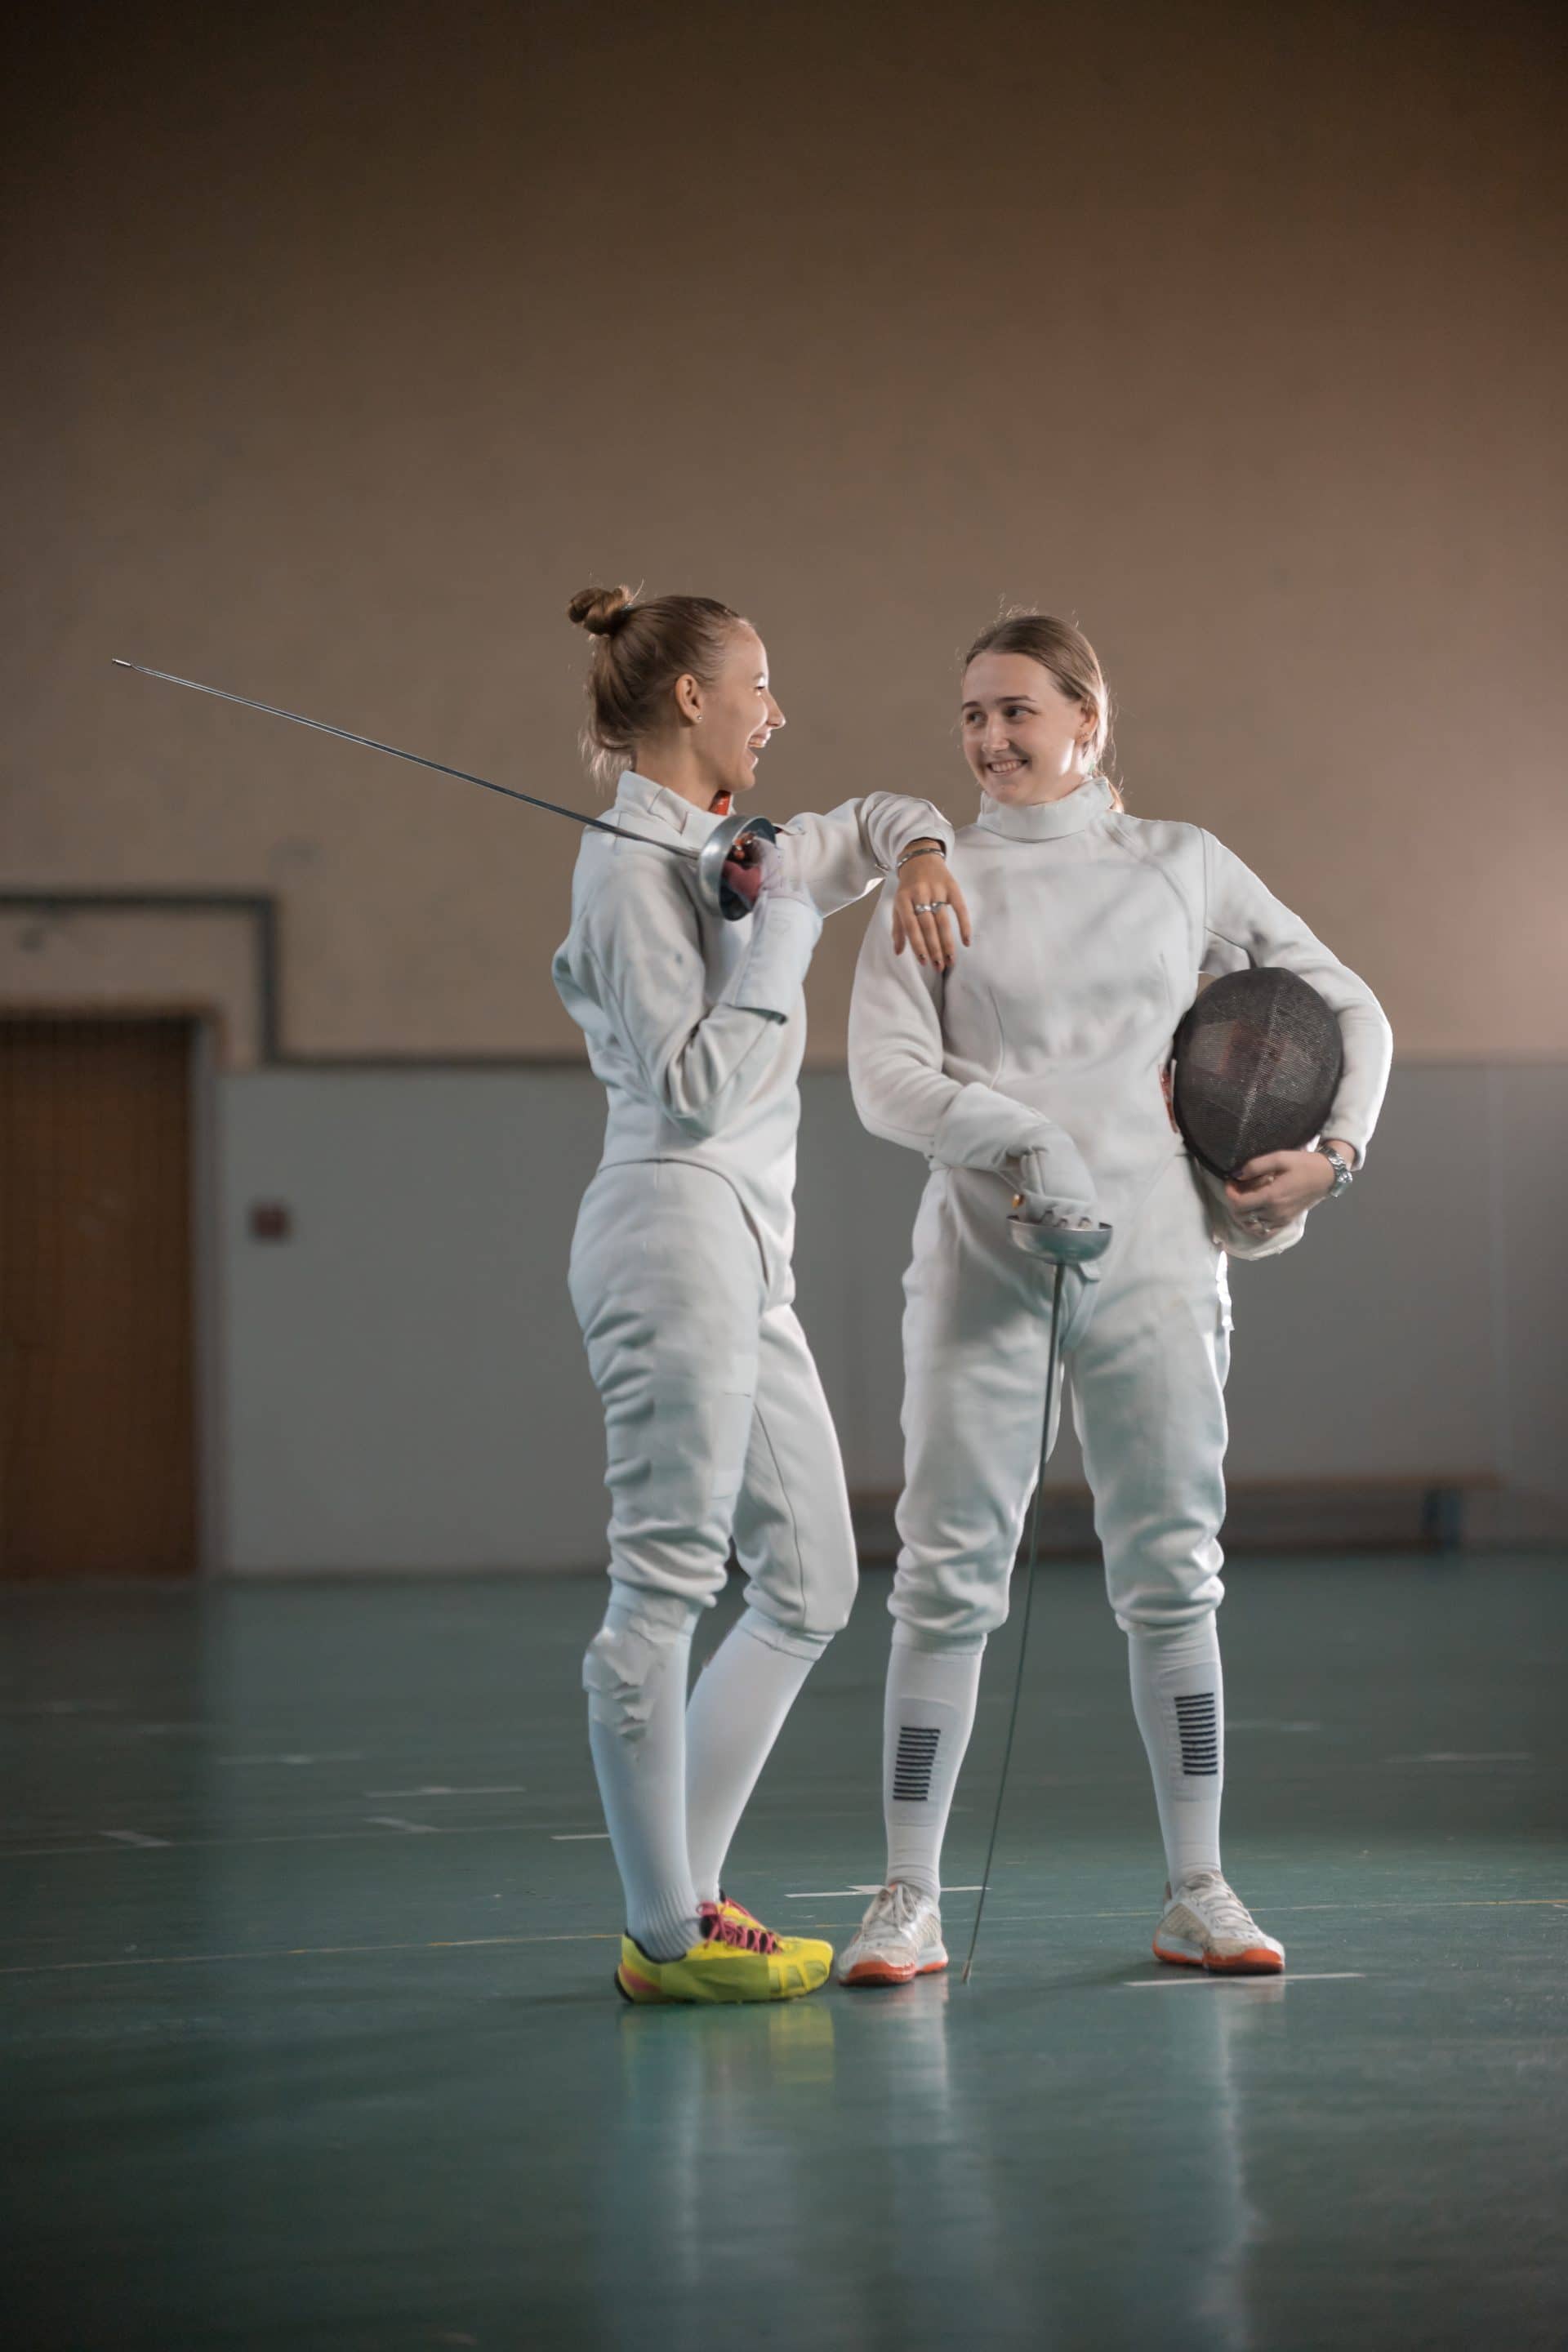 A portrait of two young women fencers laughing